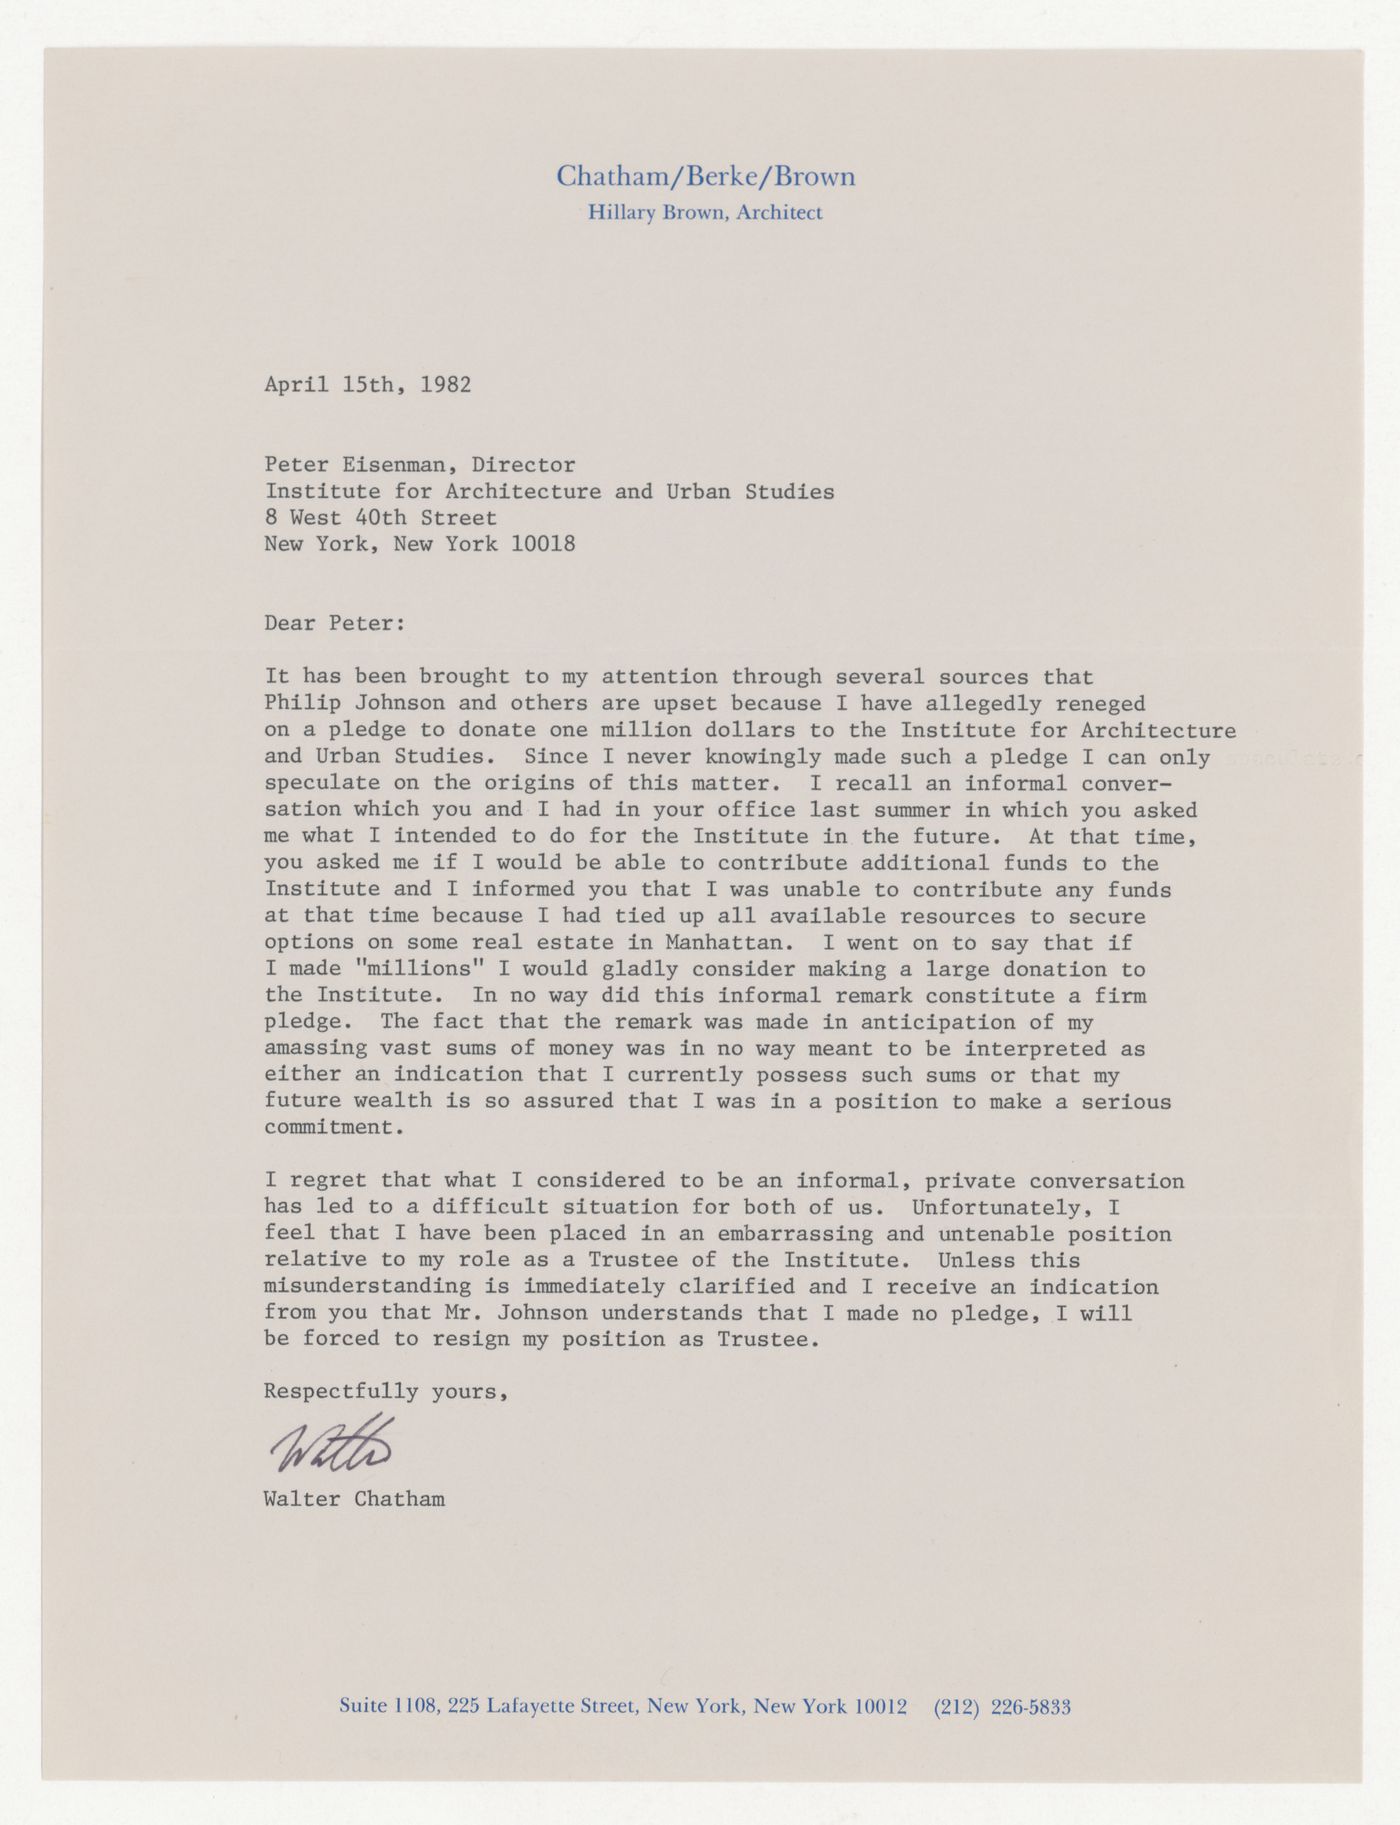 Letter from Walter Chatham to Peter D. Eisenman about funding